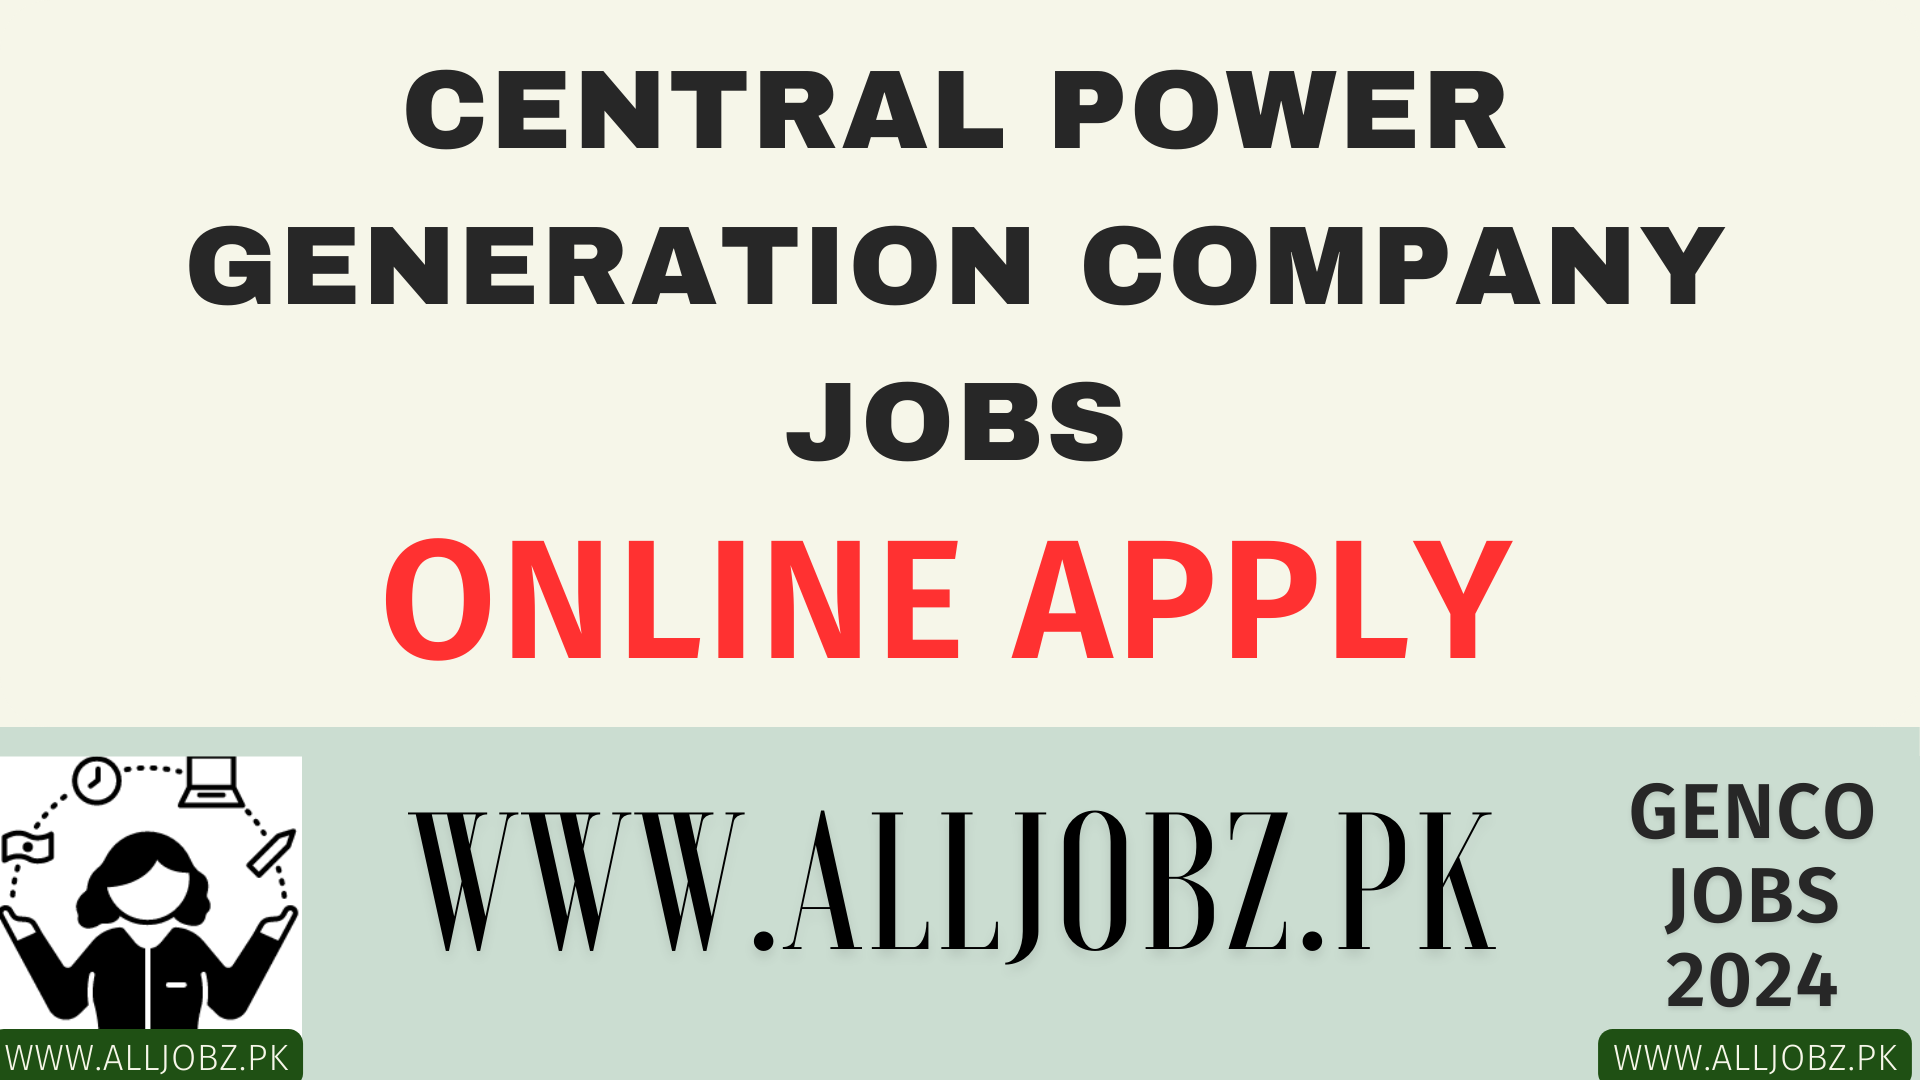 Central Power Generation Company Jobs 2024 Online Apply,